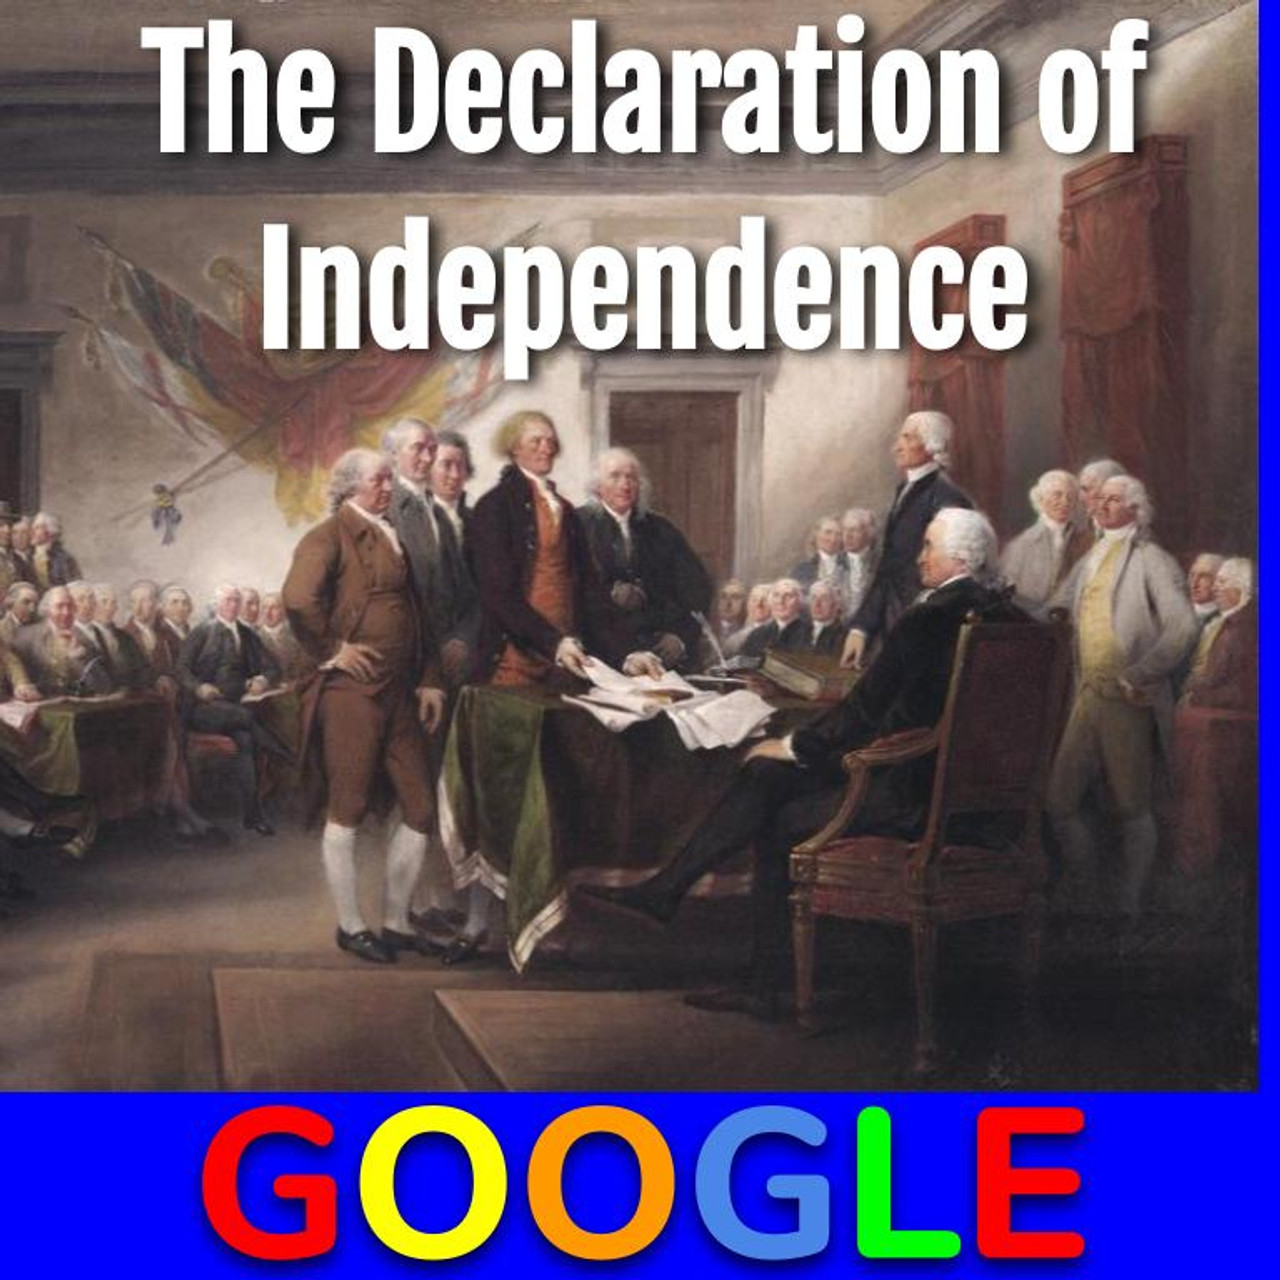 Interactive Image: Declaration of Independence